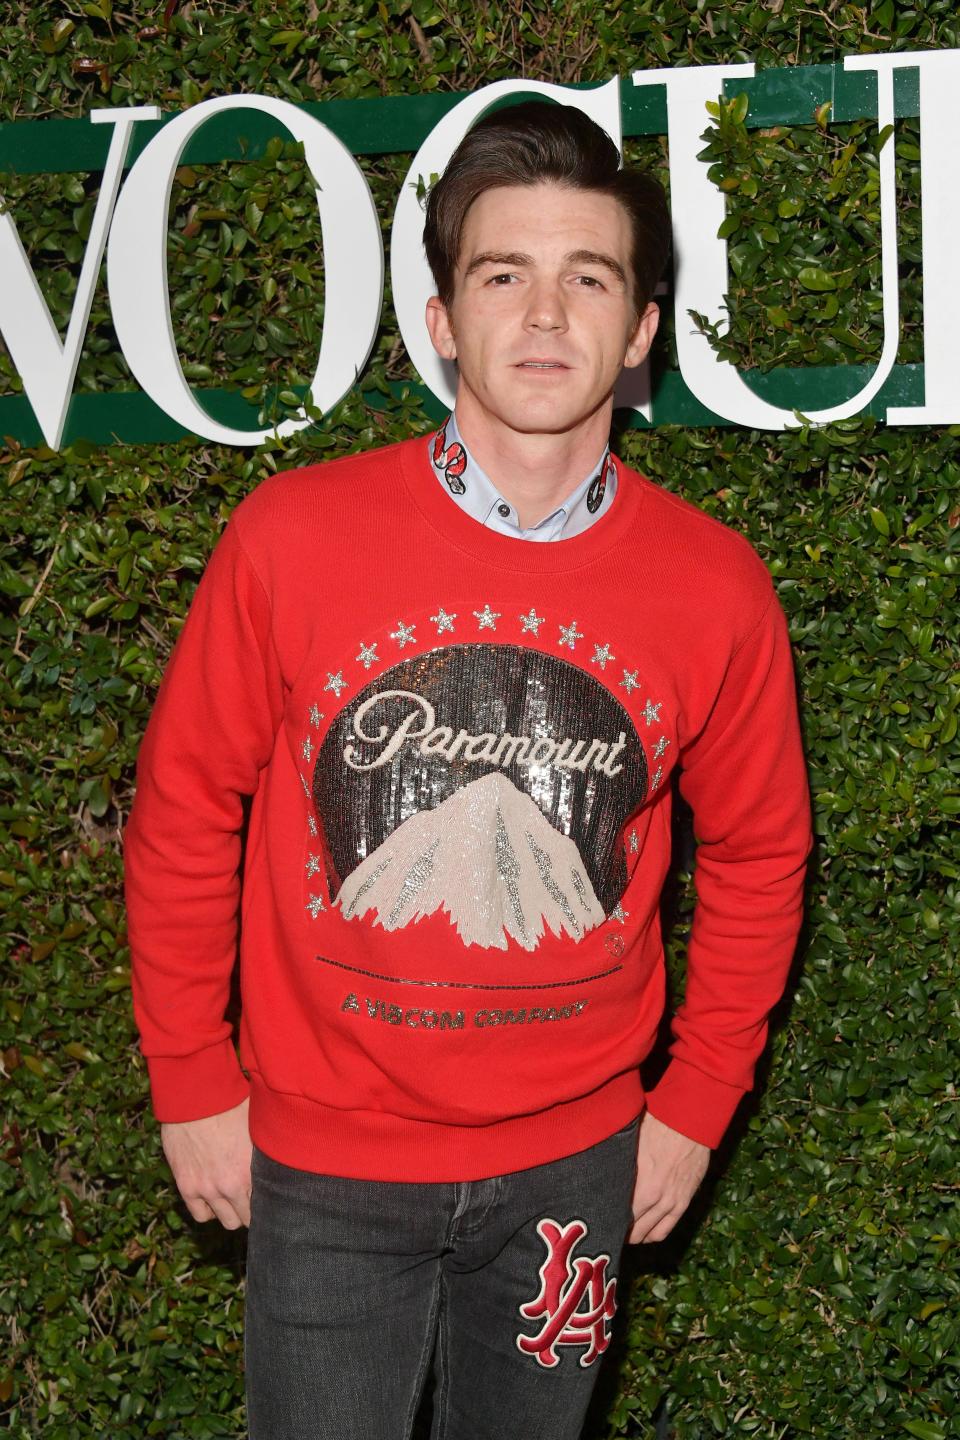 Drake Bell attends Teen Vogue's 2019 Young Hollywood Party Presented By Snap at Los Angeles Theatre on February 15, 2019 in Los Angeles, California. The actor spoke about the impact of "Quiet on Set" in a new episode of the documentary series.